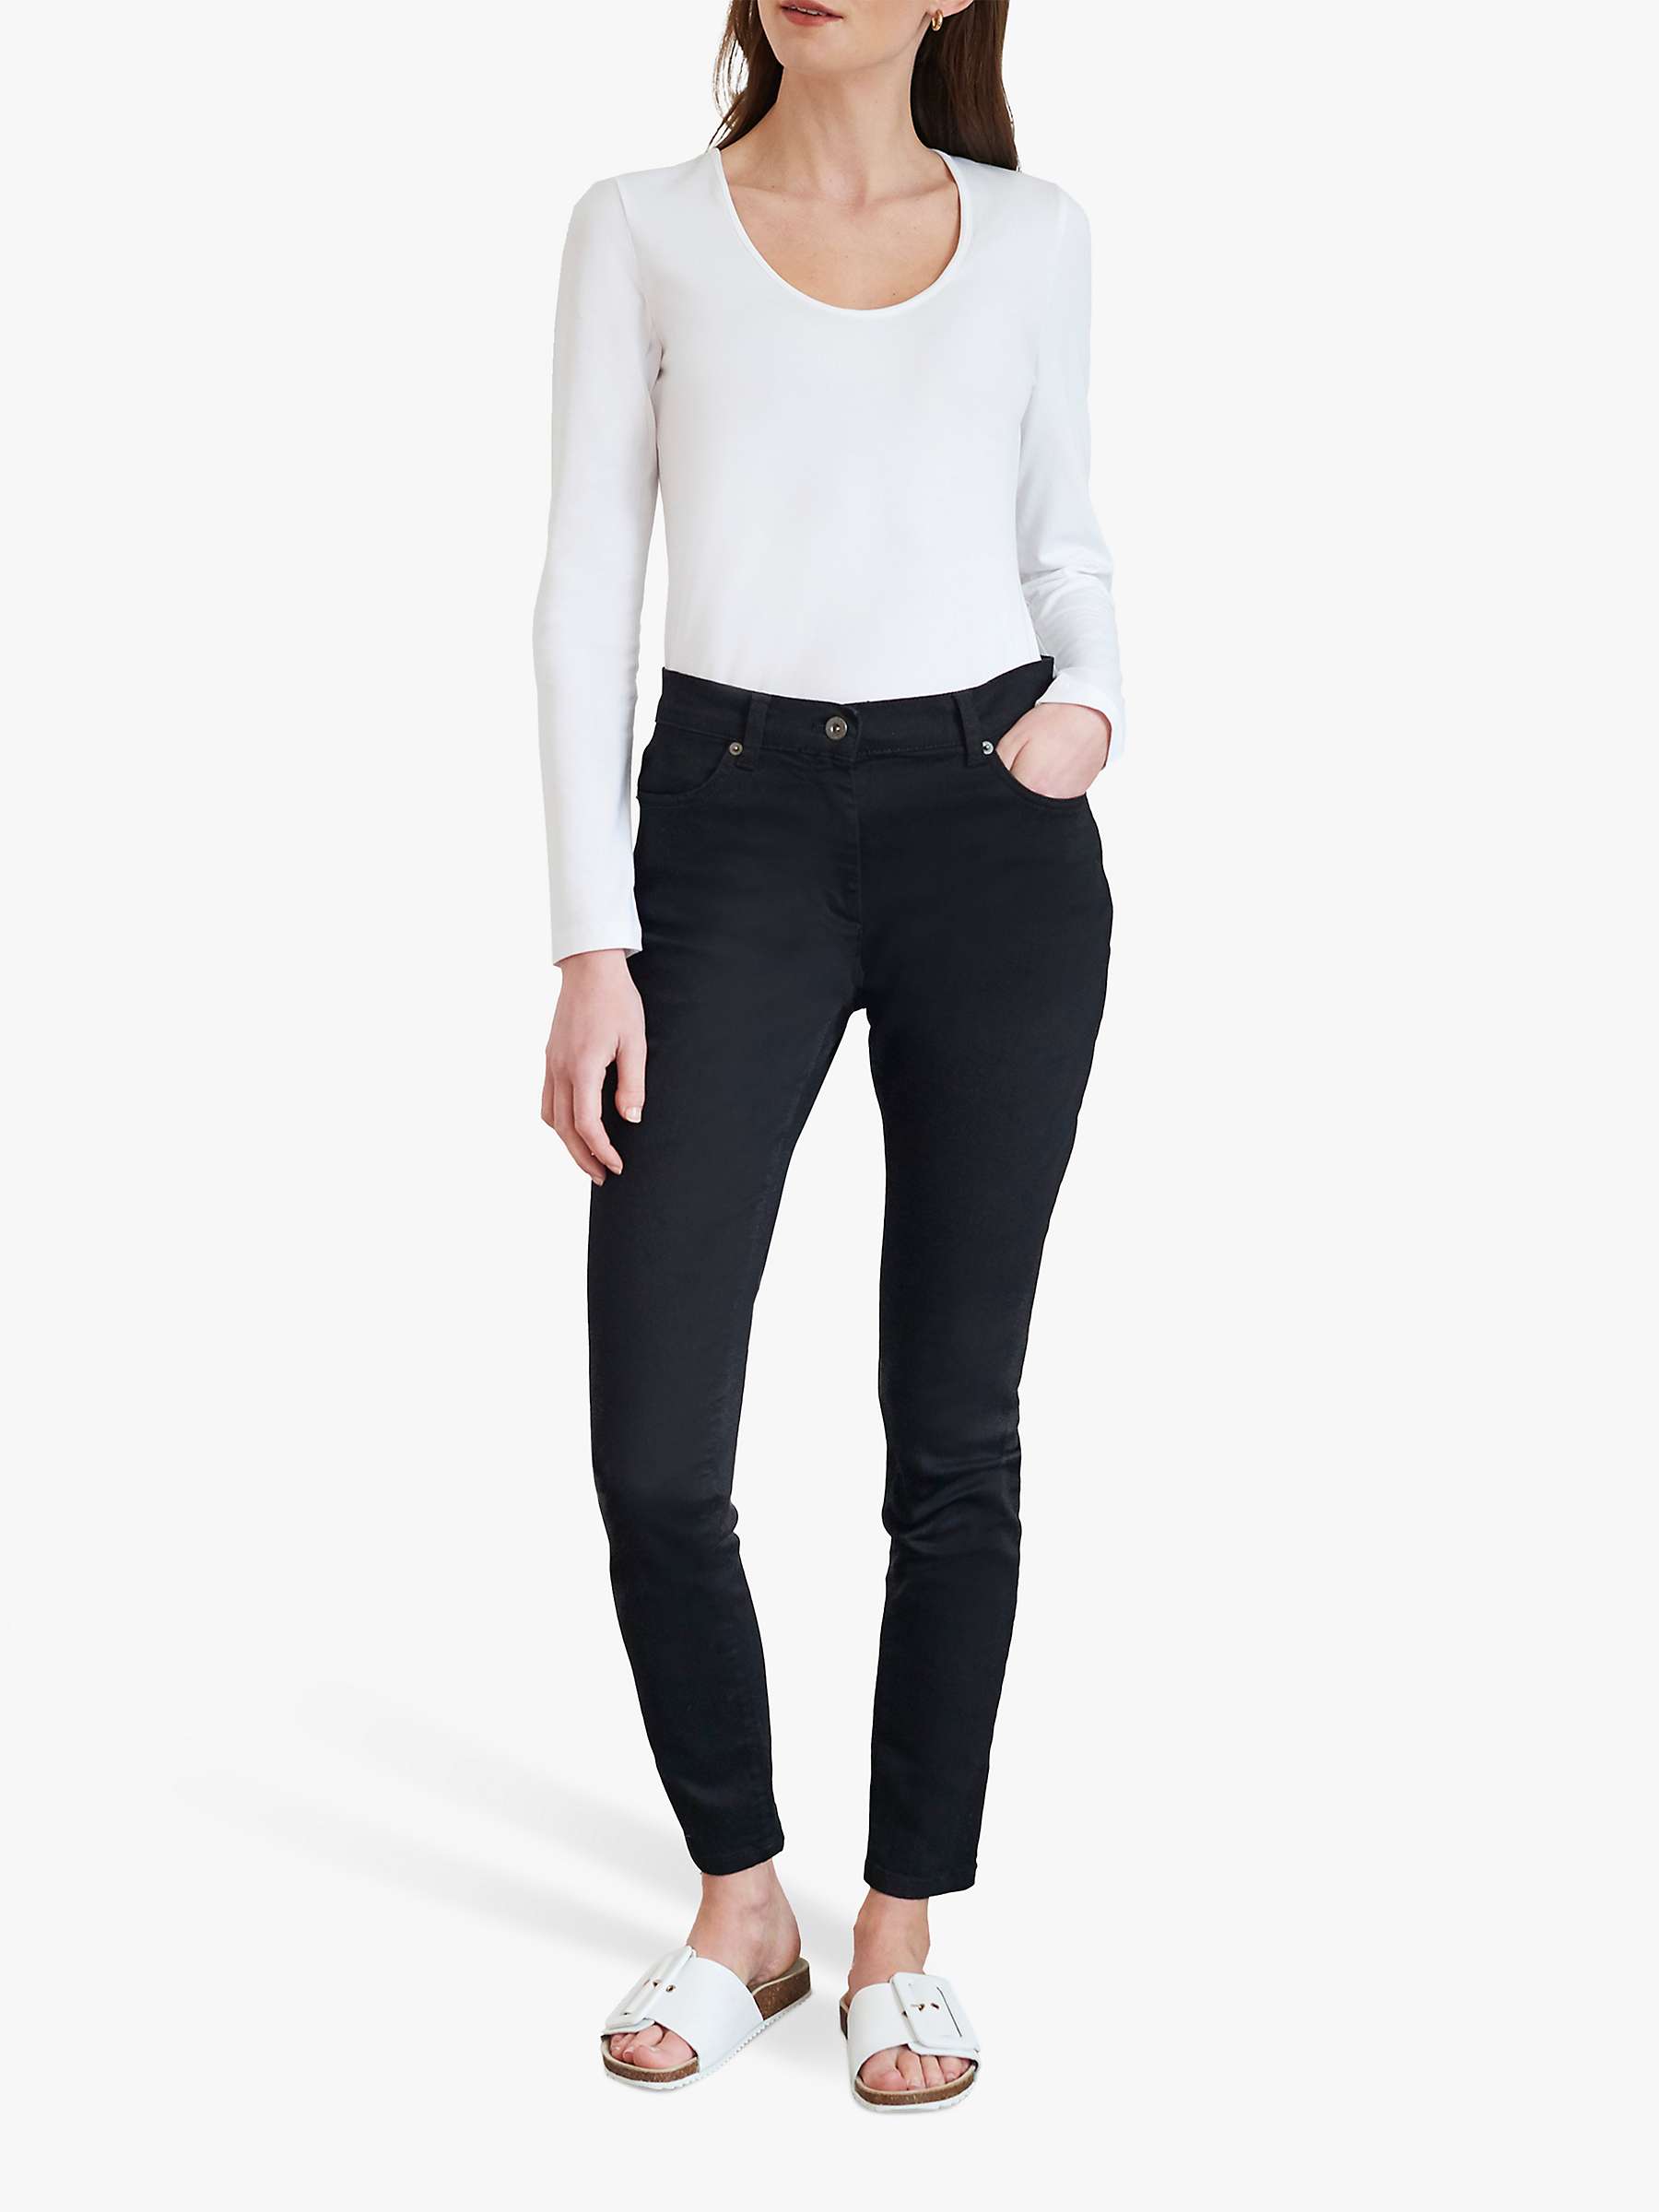 Buy Great Plains Organic Cotton Long Sleeve Top Online at johnlewis.com